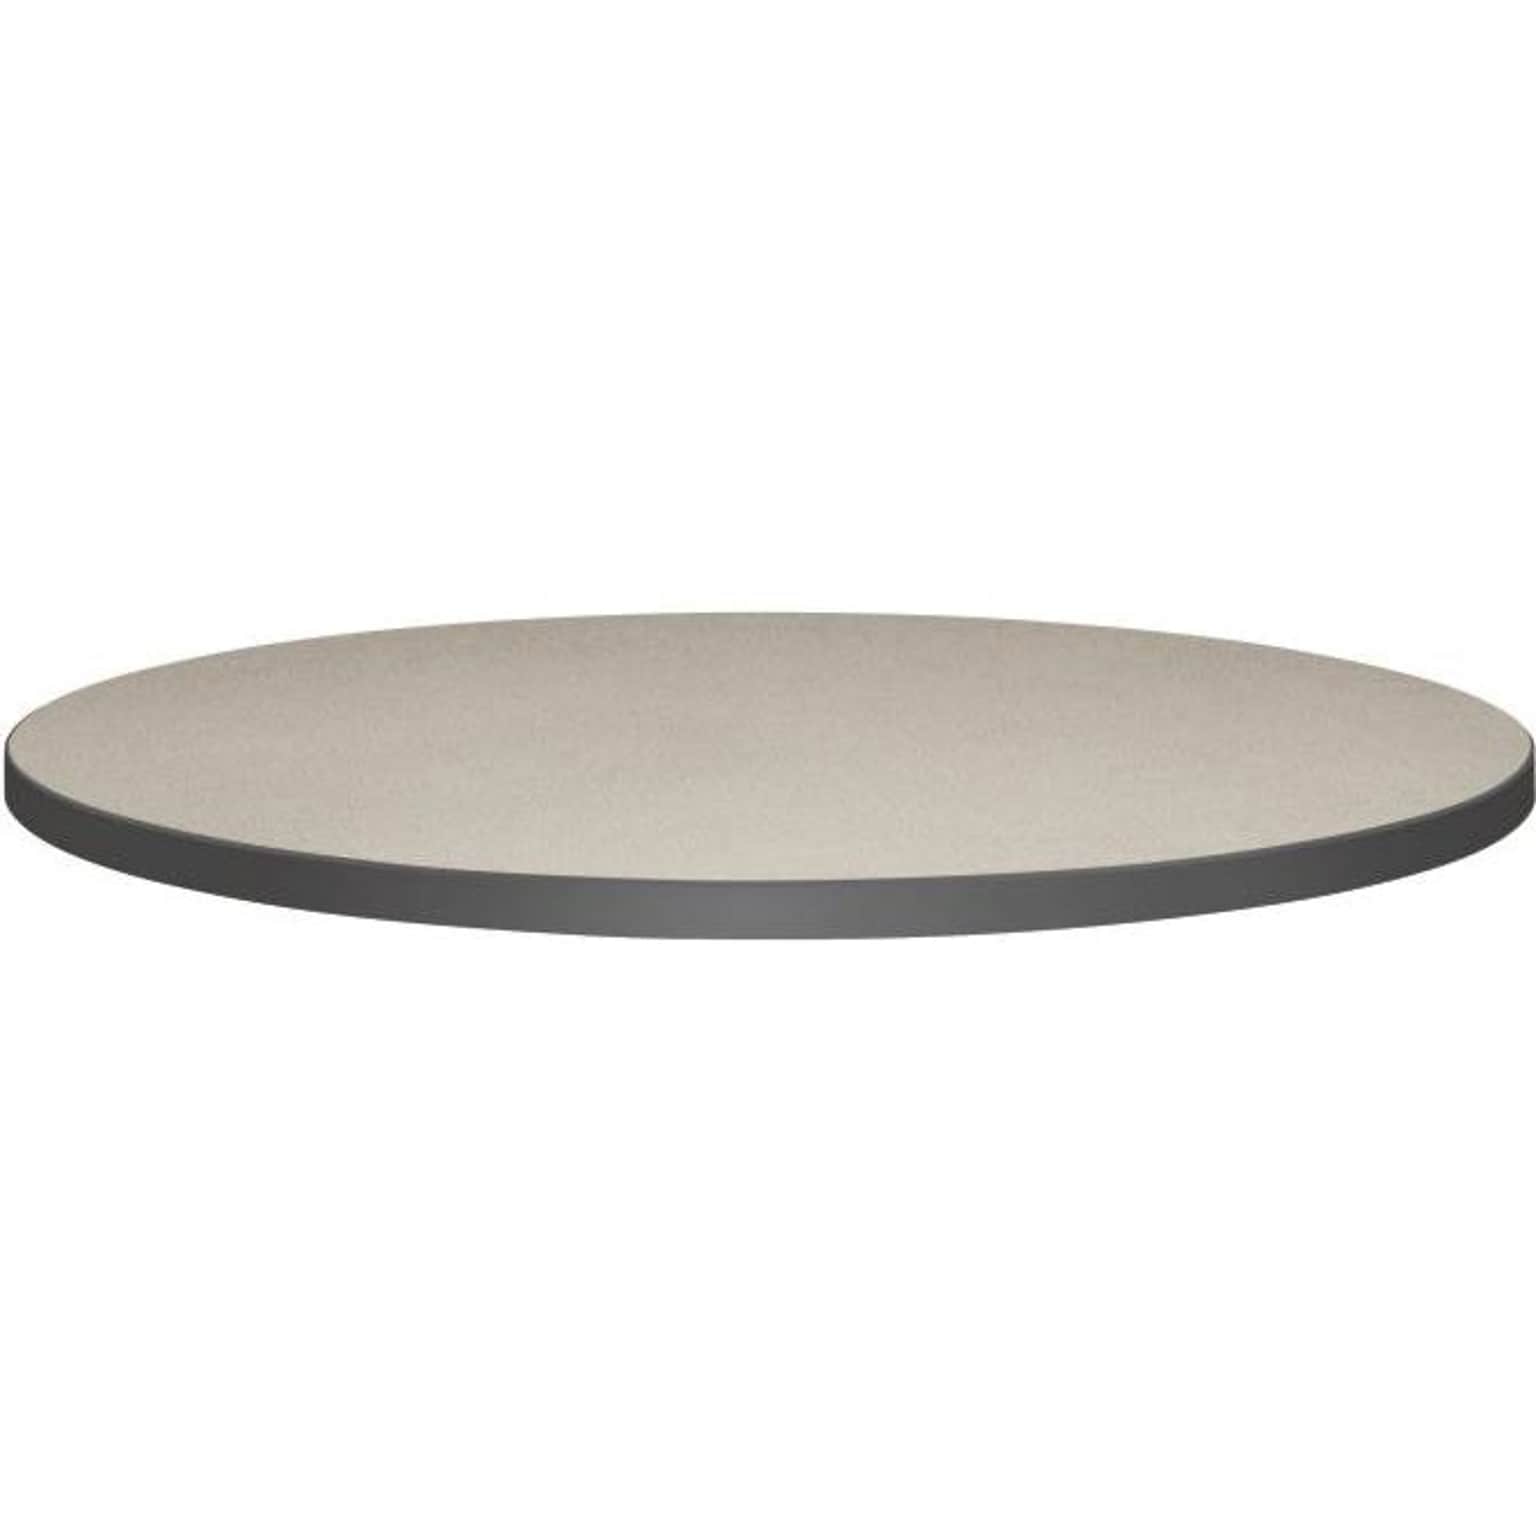 HON® Preside Laminate Round Conference Tabletop, 42D, Gray, 1 1/8H x 42W x 42D